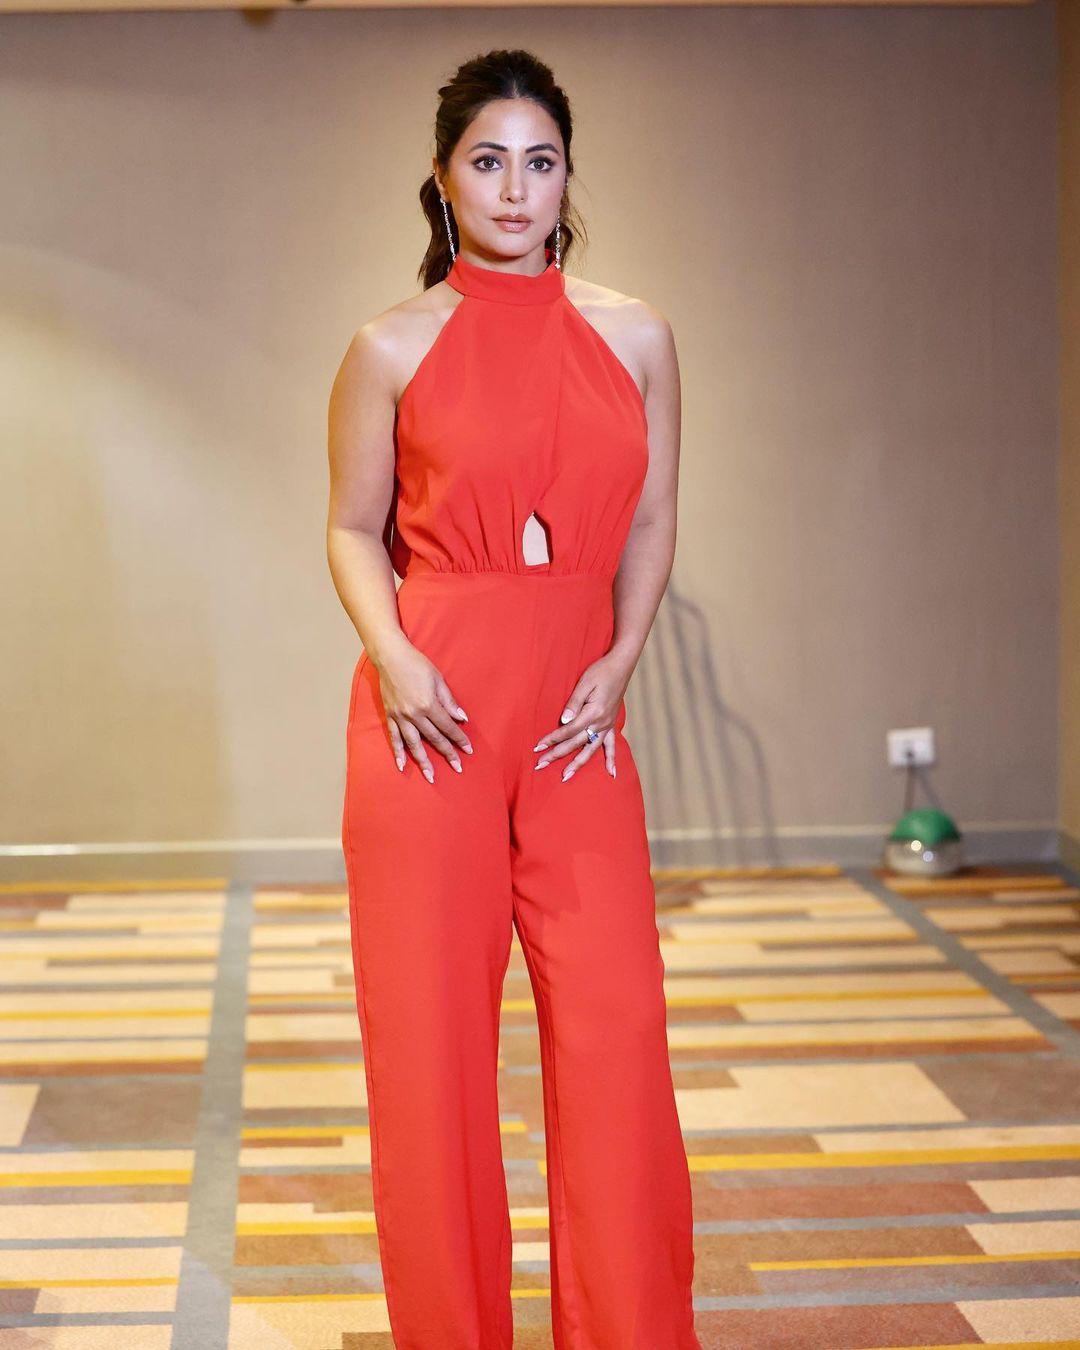 Hina Khan's red jumpsuit is yet another outfit you can wear to ace your look during this summer season